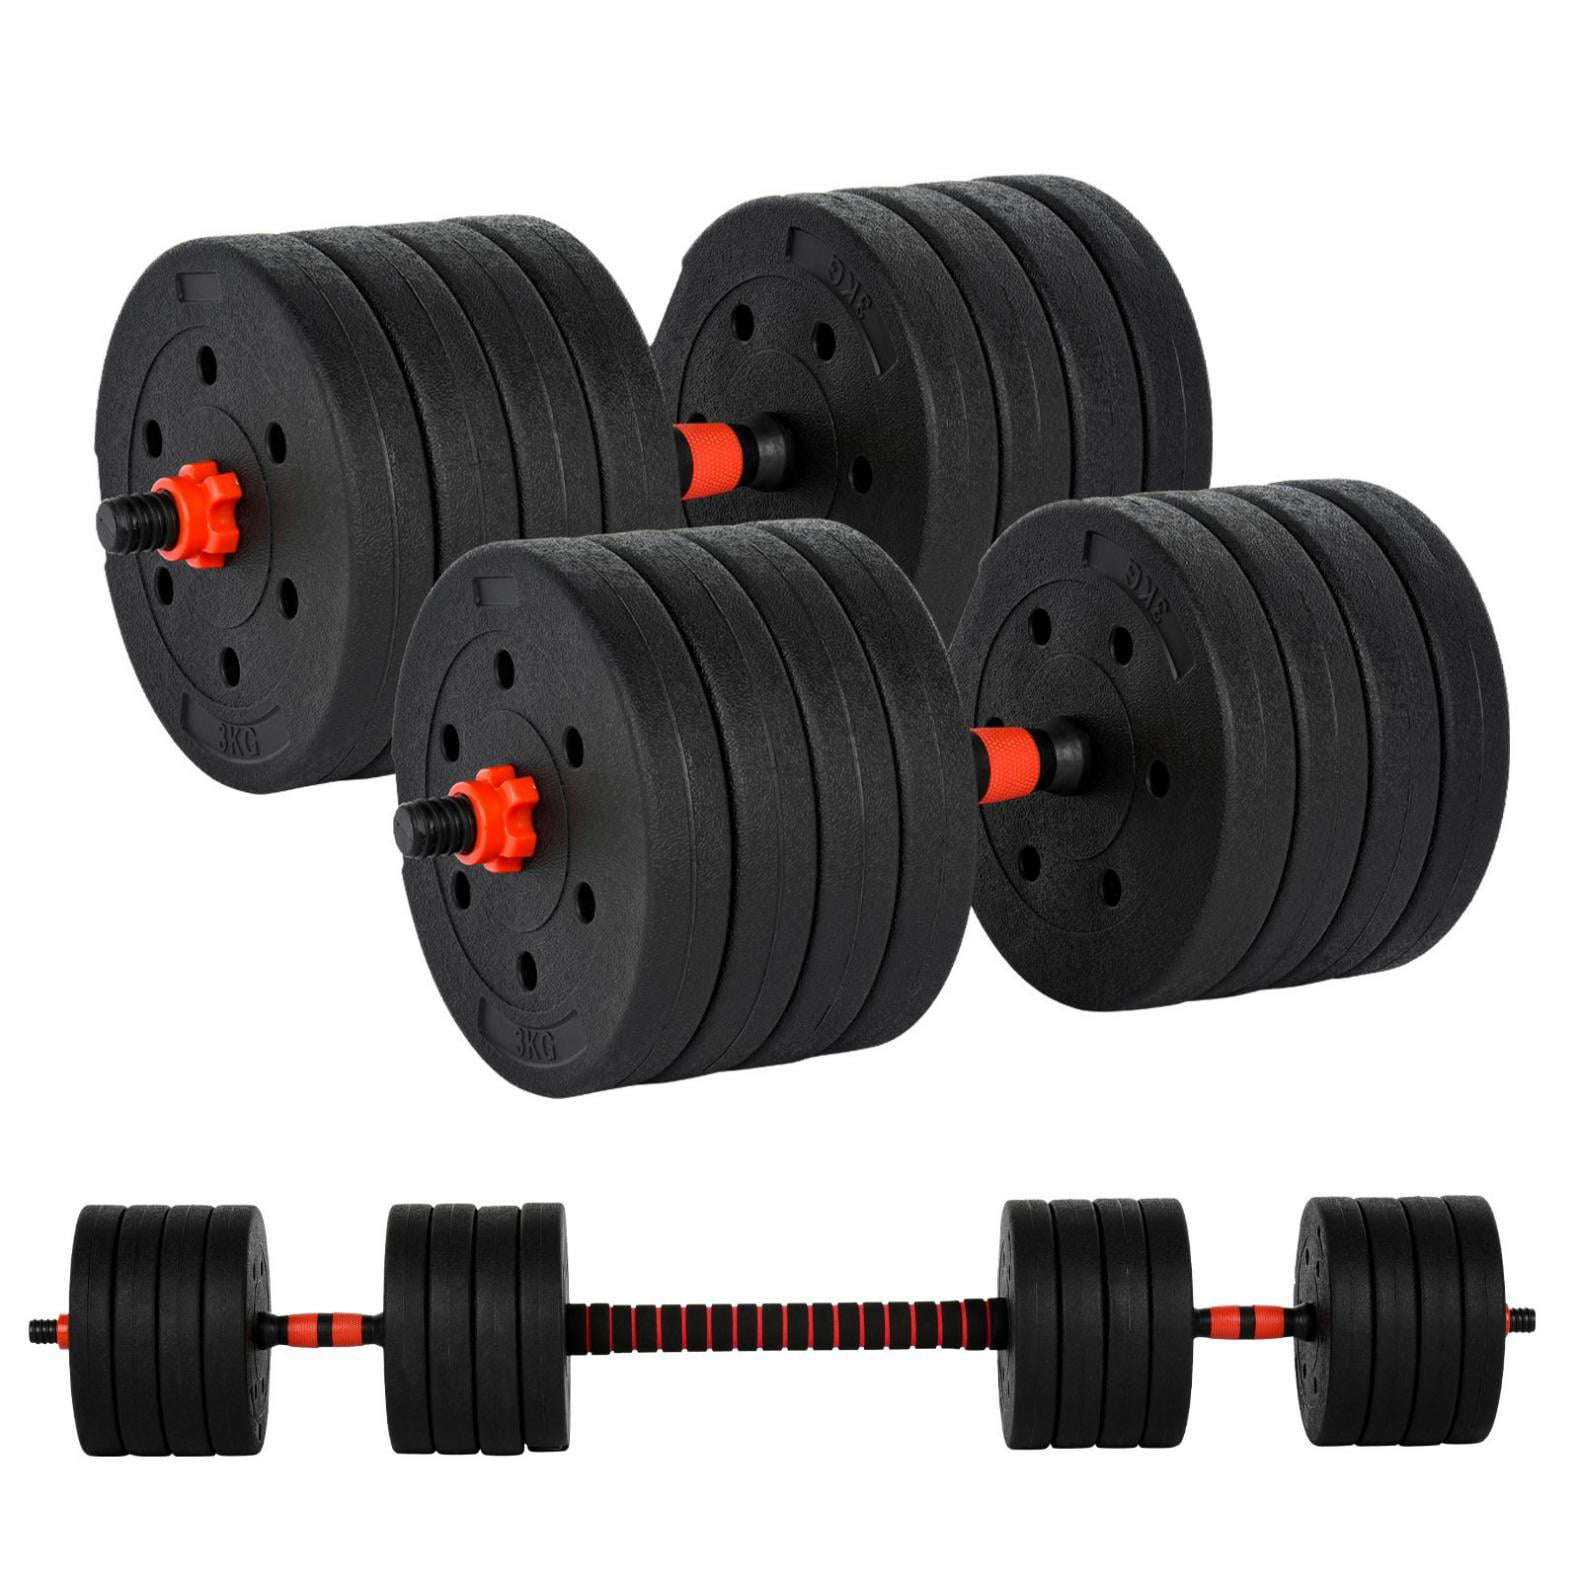 Totall 88LB Adjustable Weight Dumbbell Set Cap Gym Barbell Plates Body Workout A 